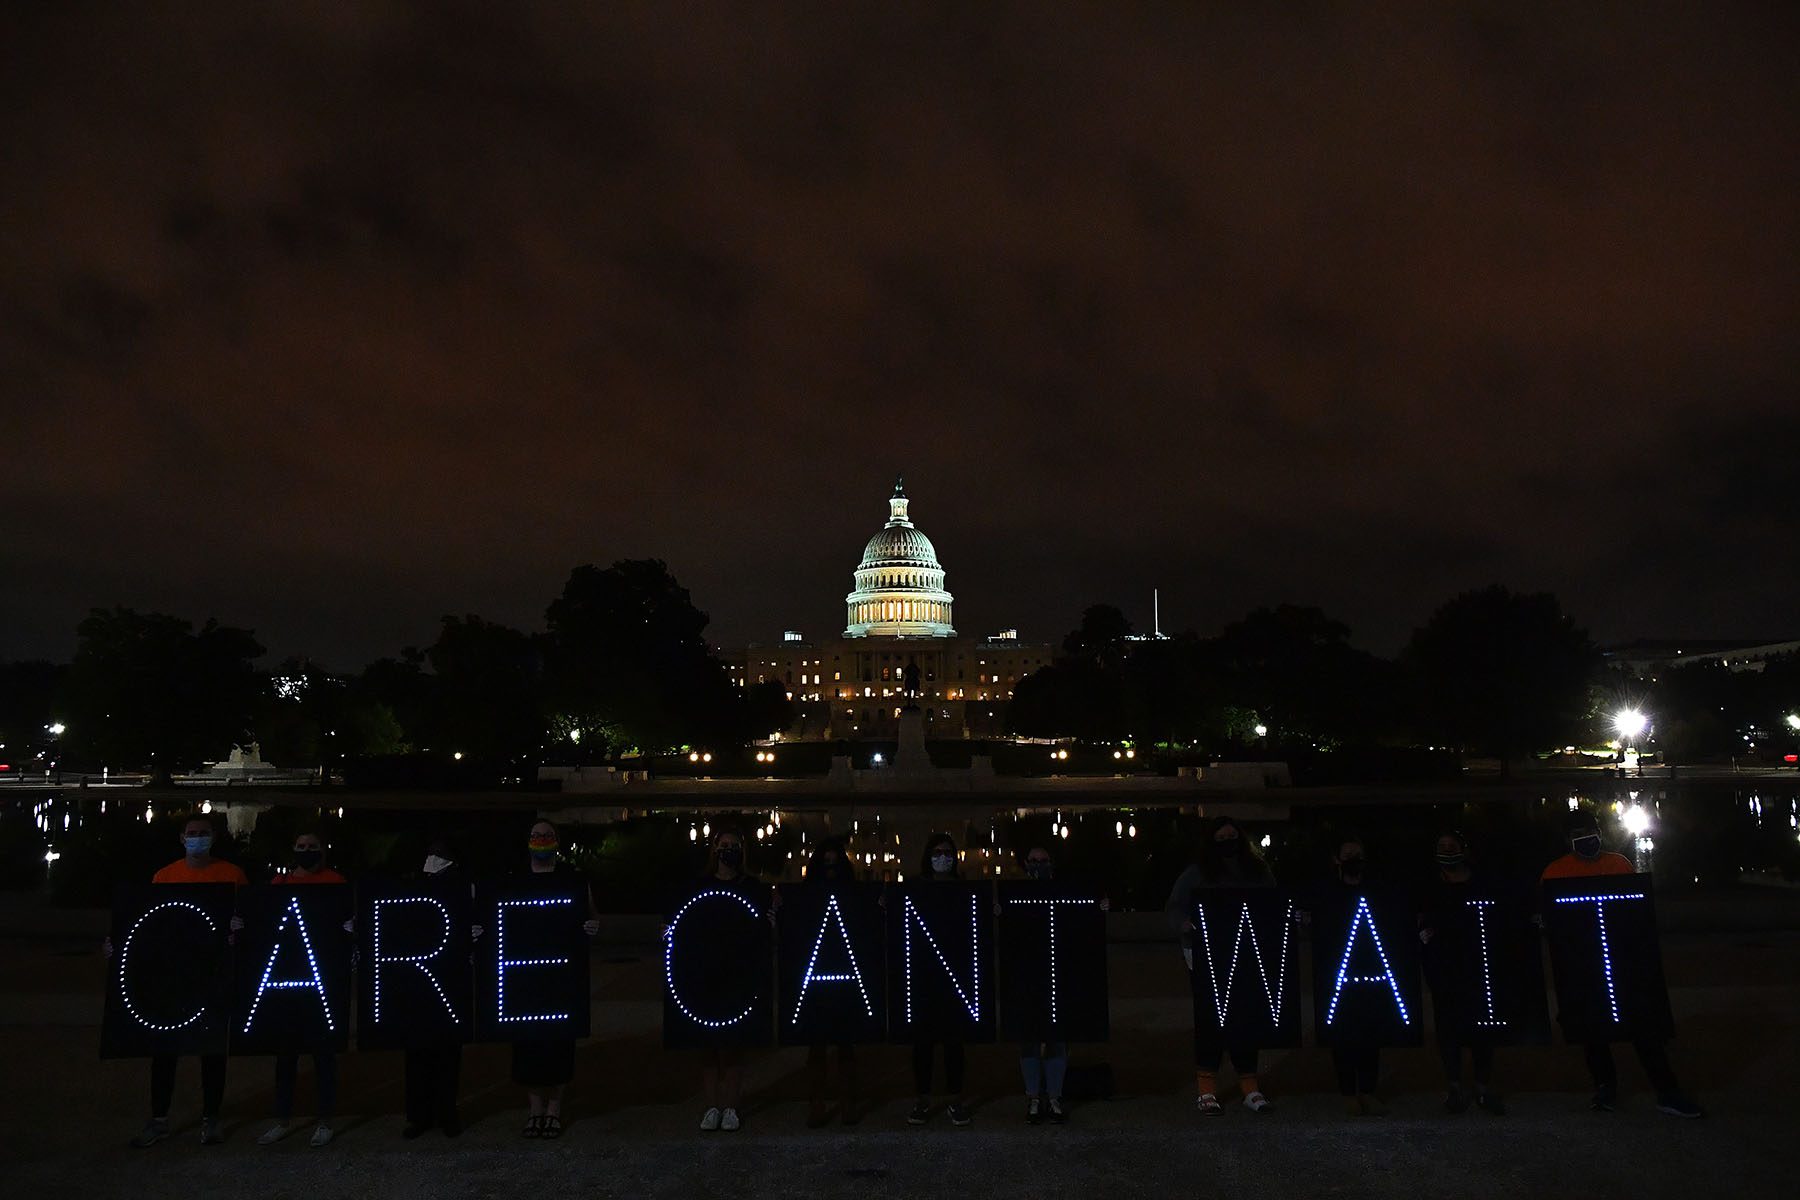 Activists hold neon signs that read "Care Can't Wait" while the U.S. Capitol Building is seen in the background.